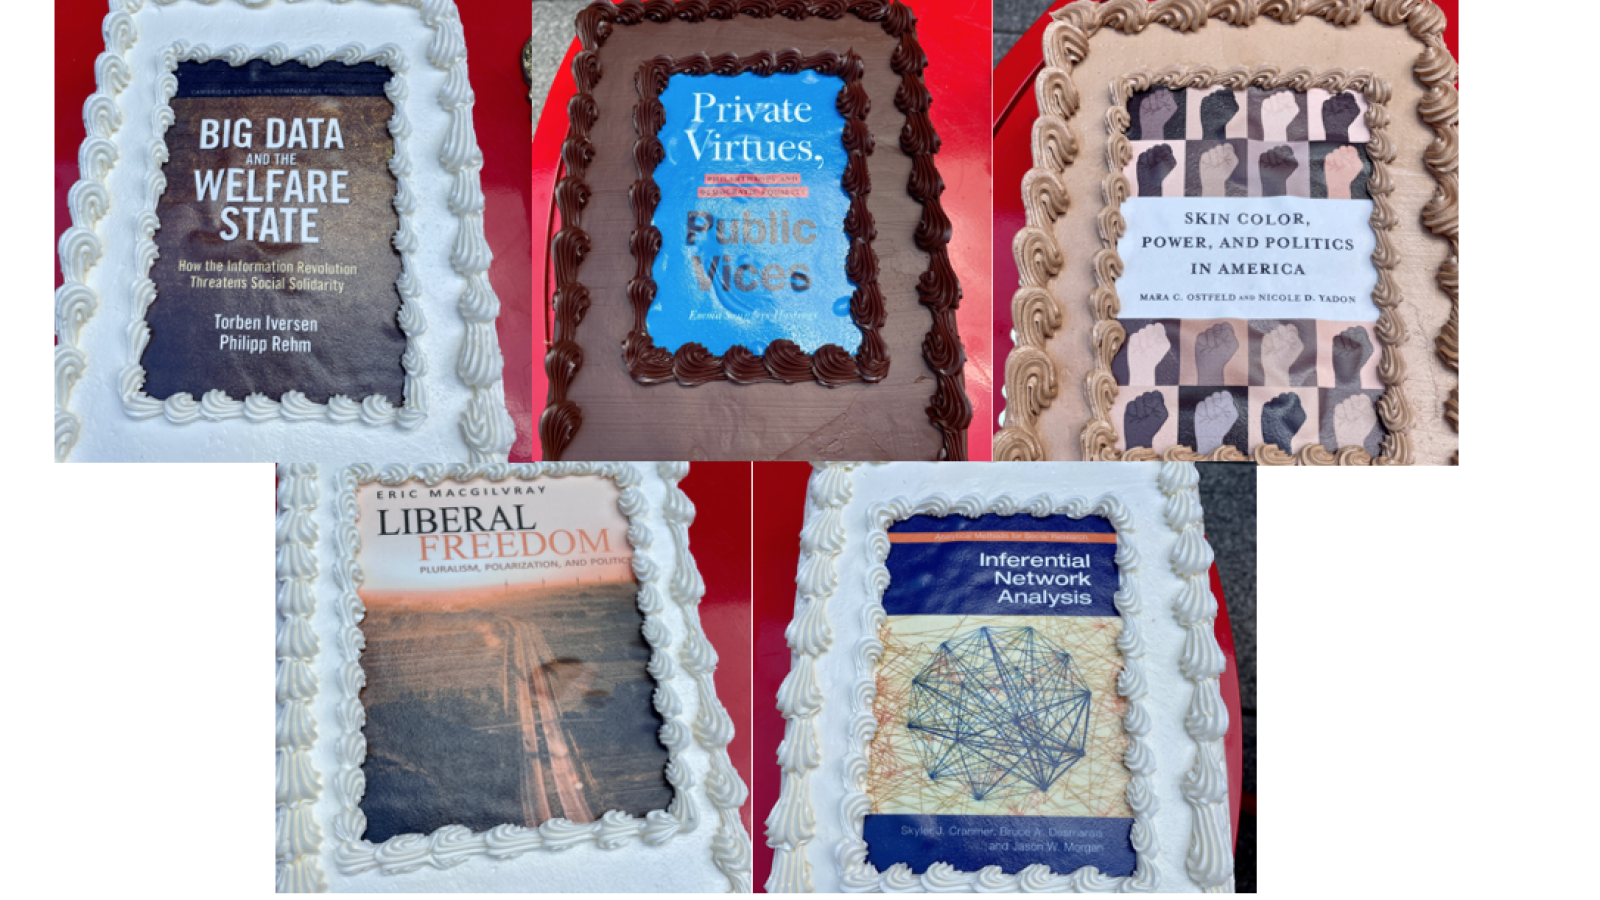 5 chocolate and white cakes with screen printed images of book covers